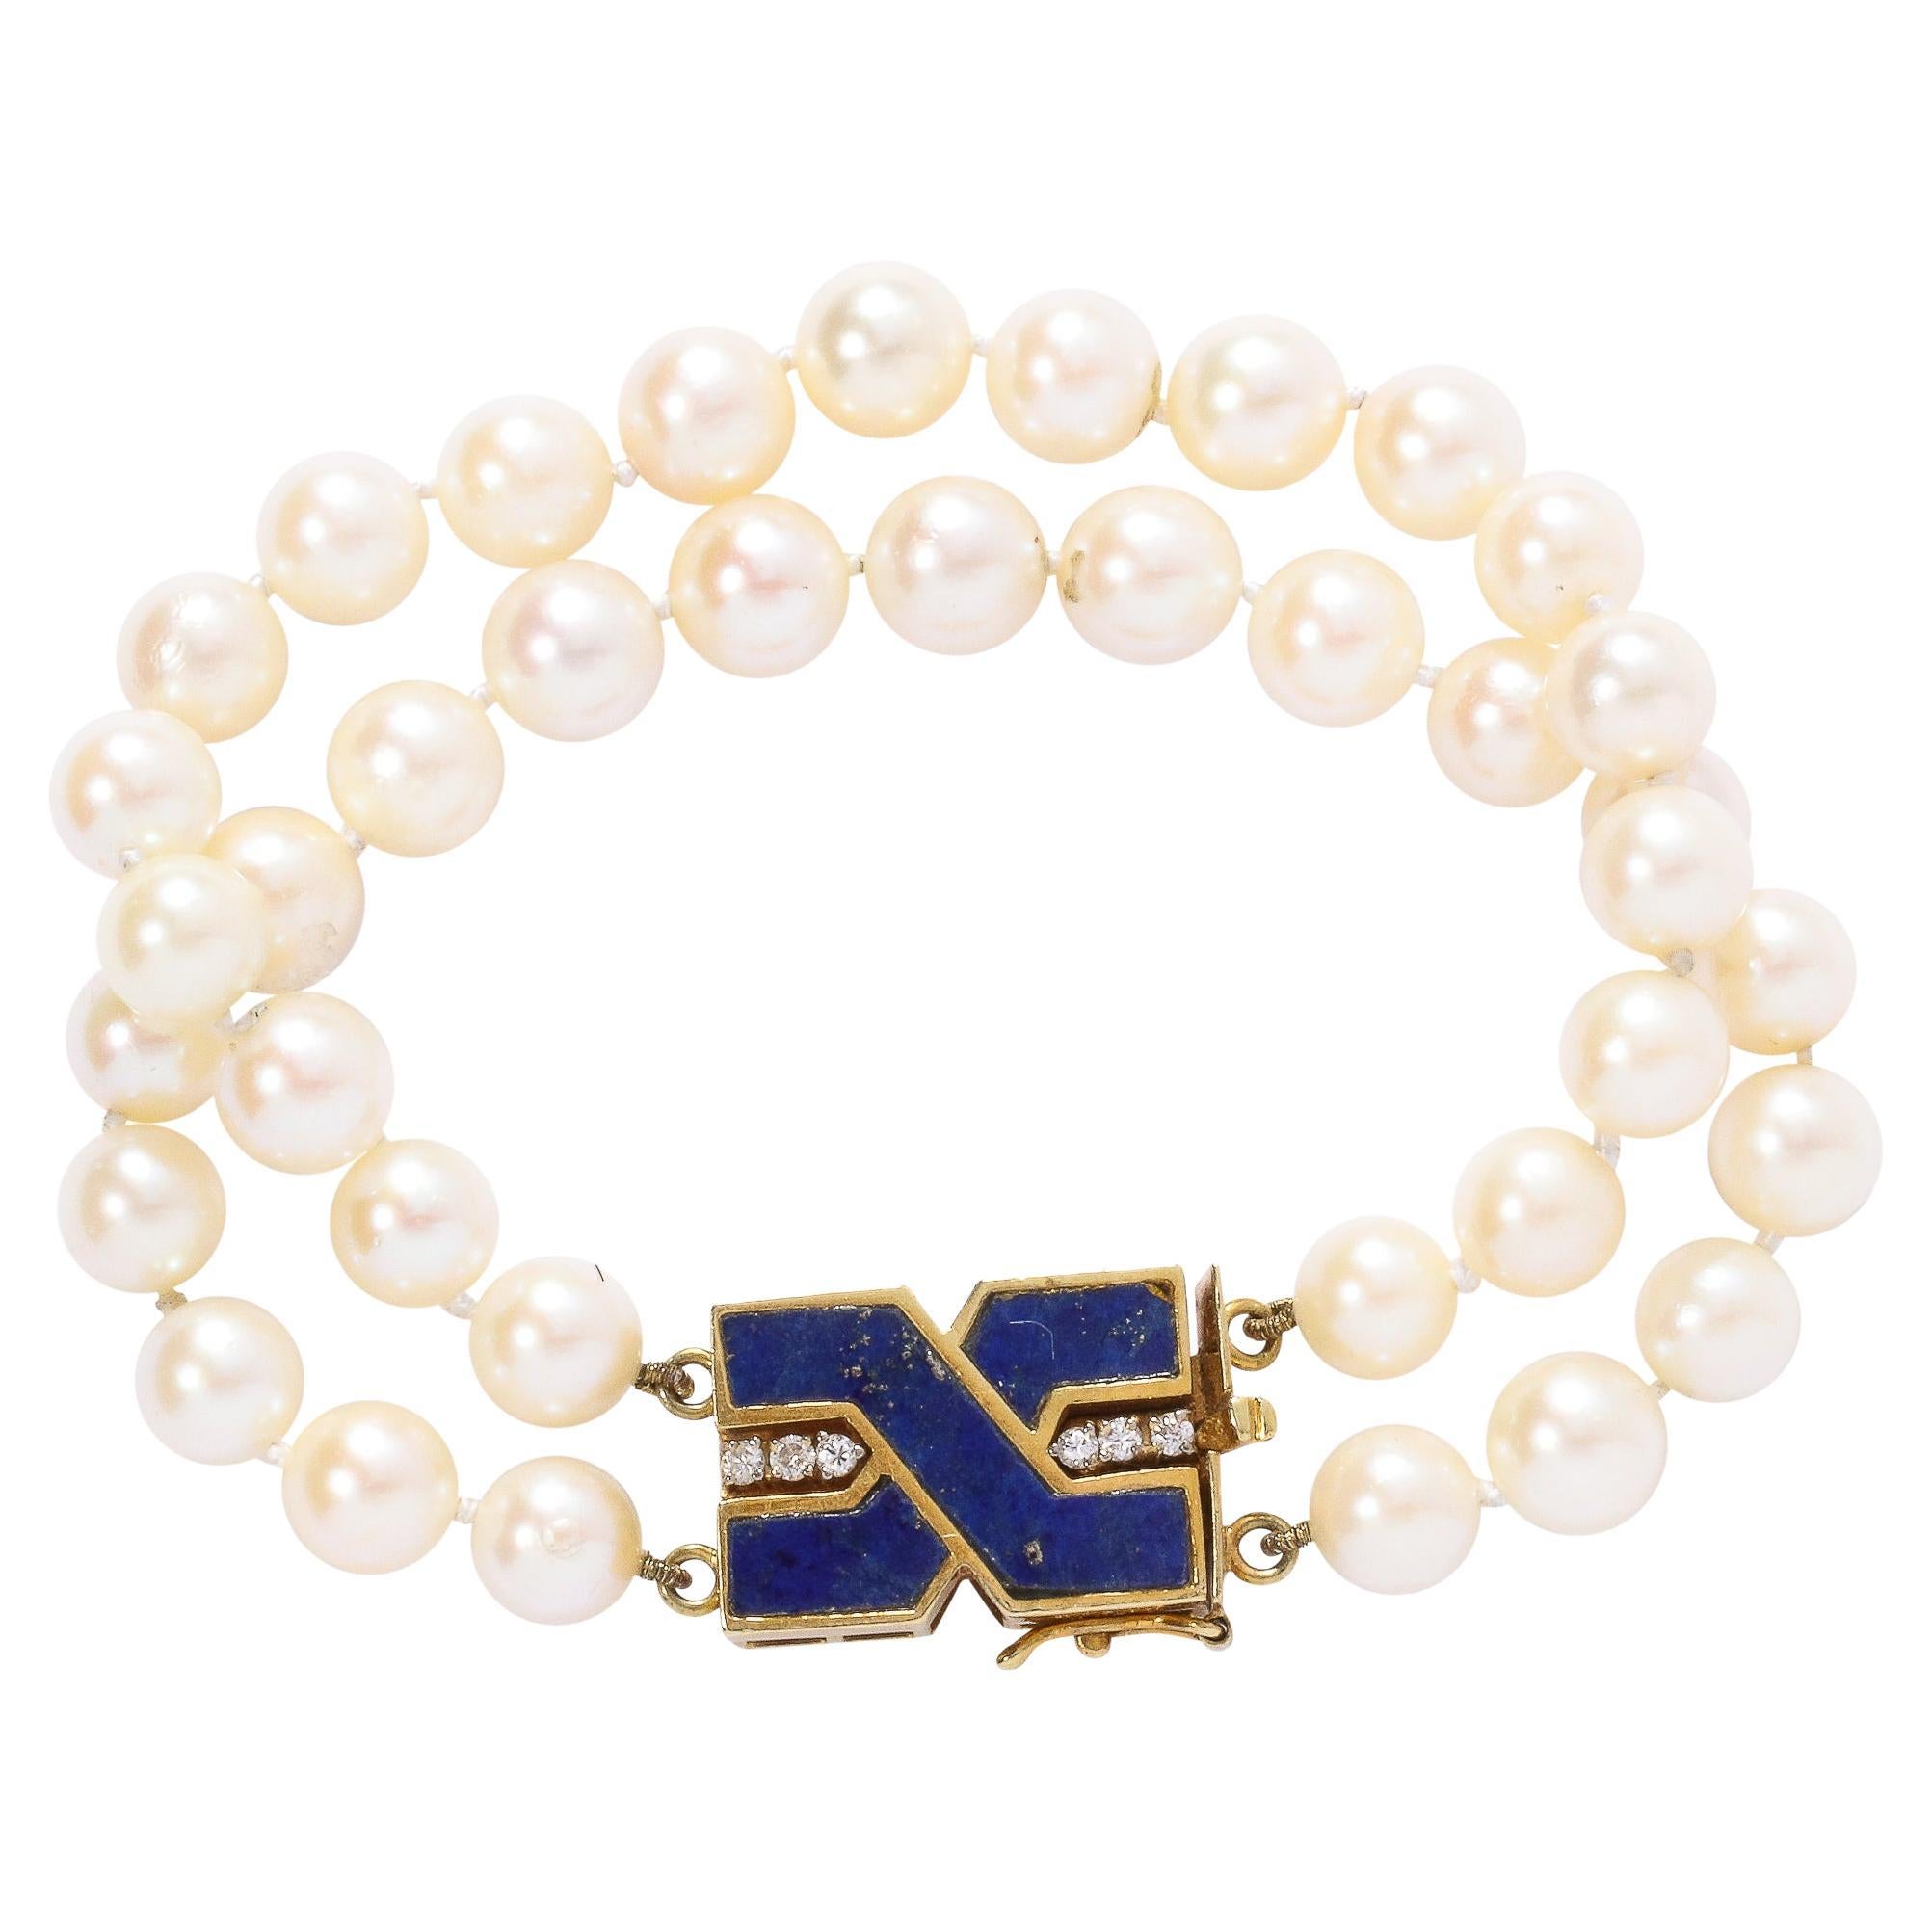 This very sophisticated double strand pearl bracelet are fitted with 38 fine pearls of approximately 7 mm each in a lovely rose luster. It is secured with a 18k yellow gold ,lapis lazuli and diamond clasp. The bold modernist geometric design for the